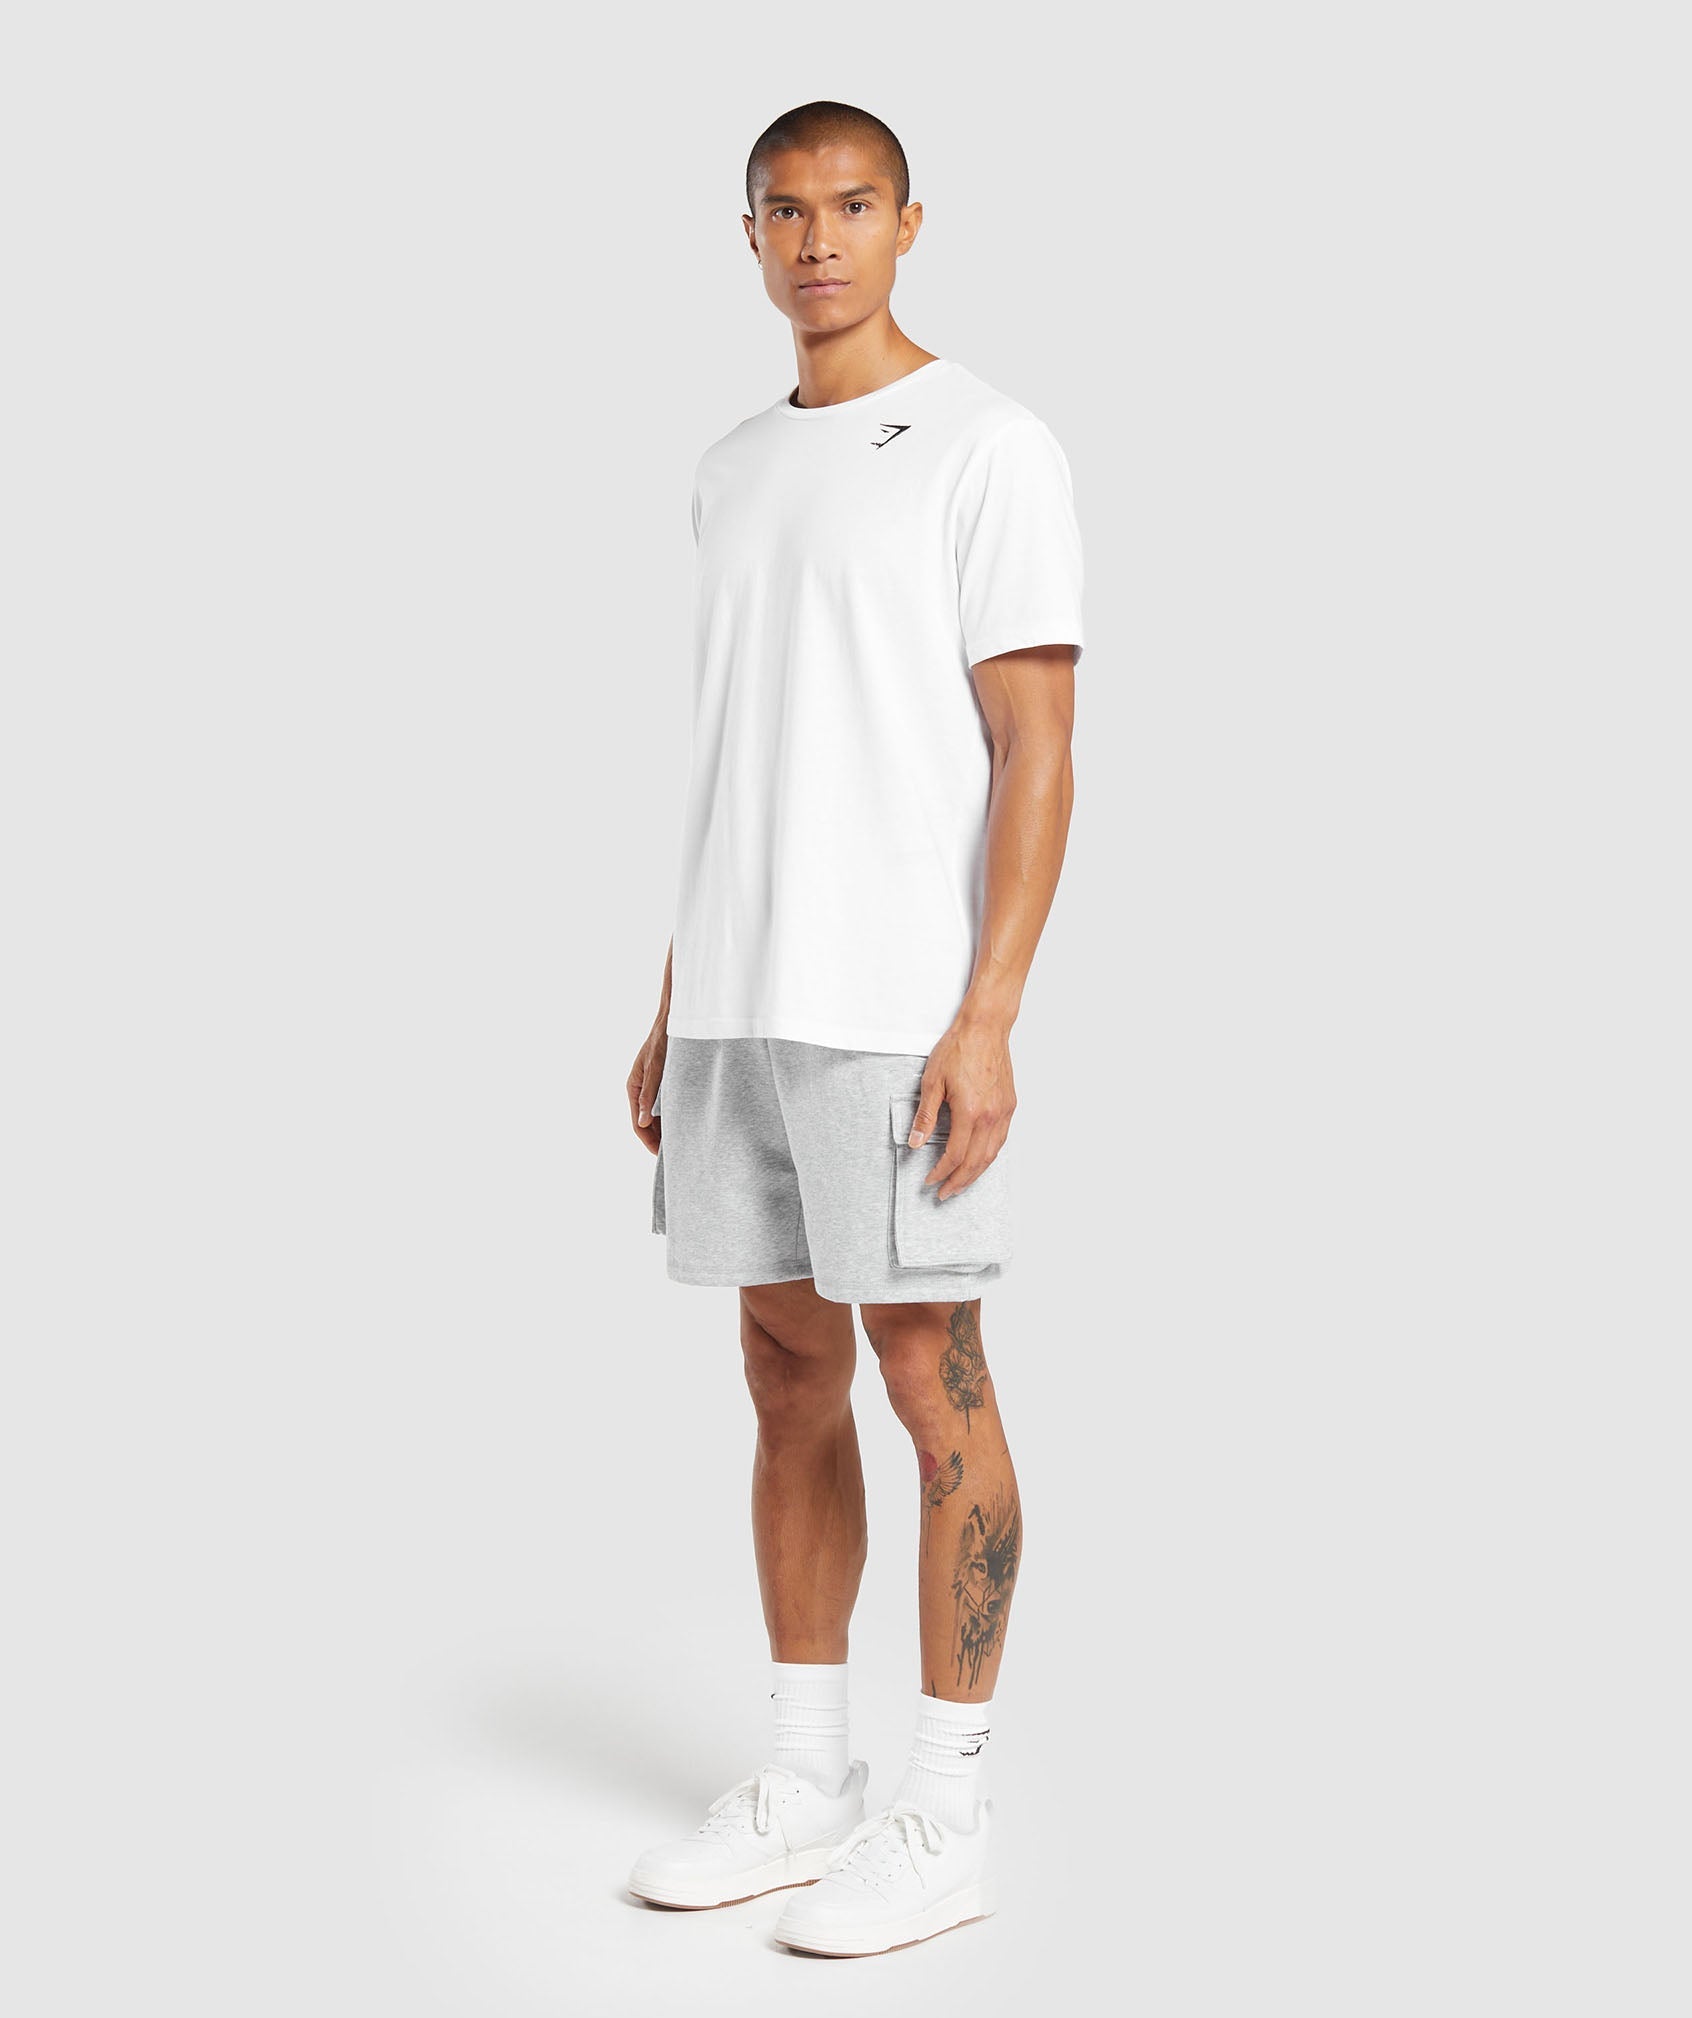 Crest Cargo Shorts in Light Grey Core Marl - view 6